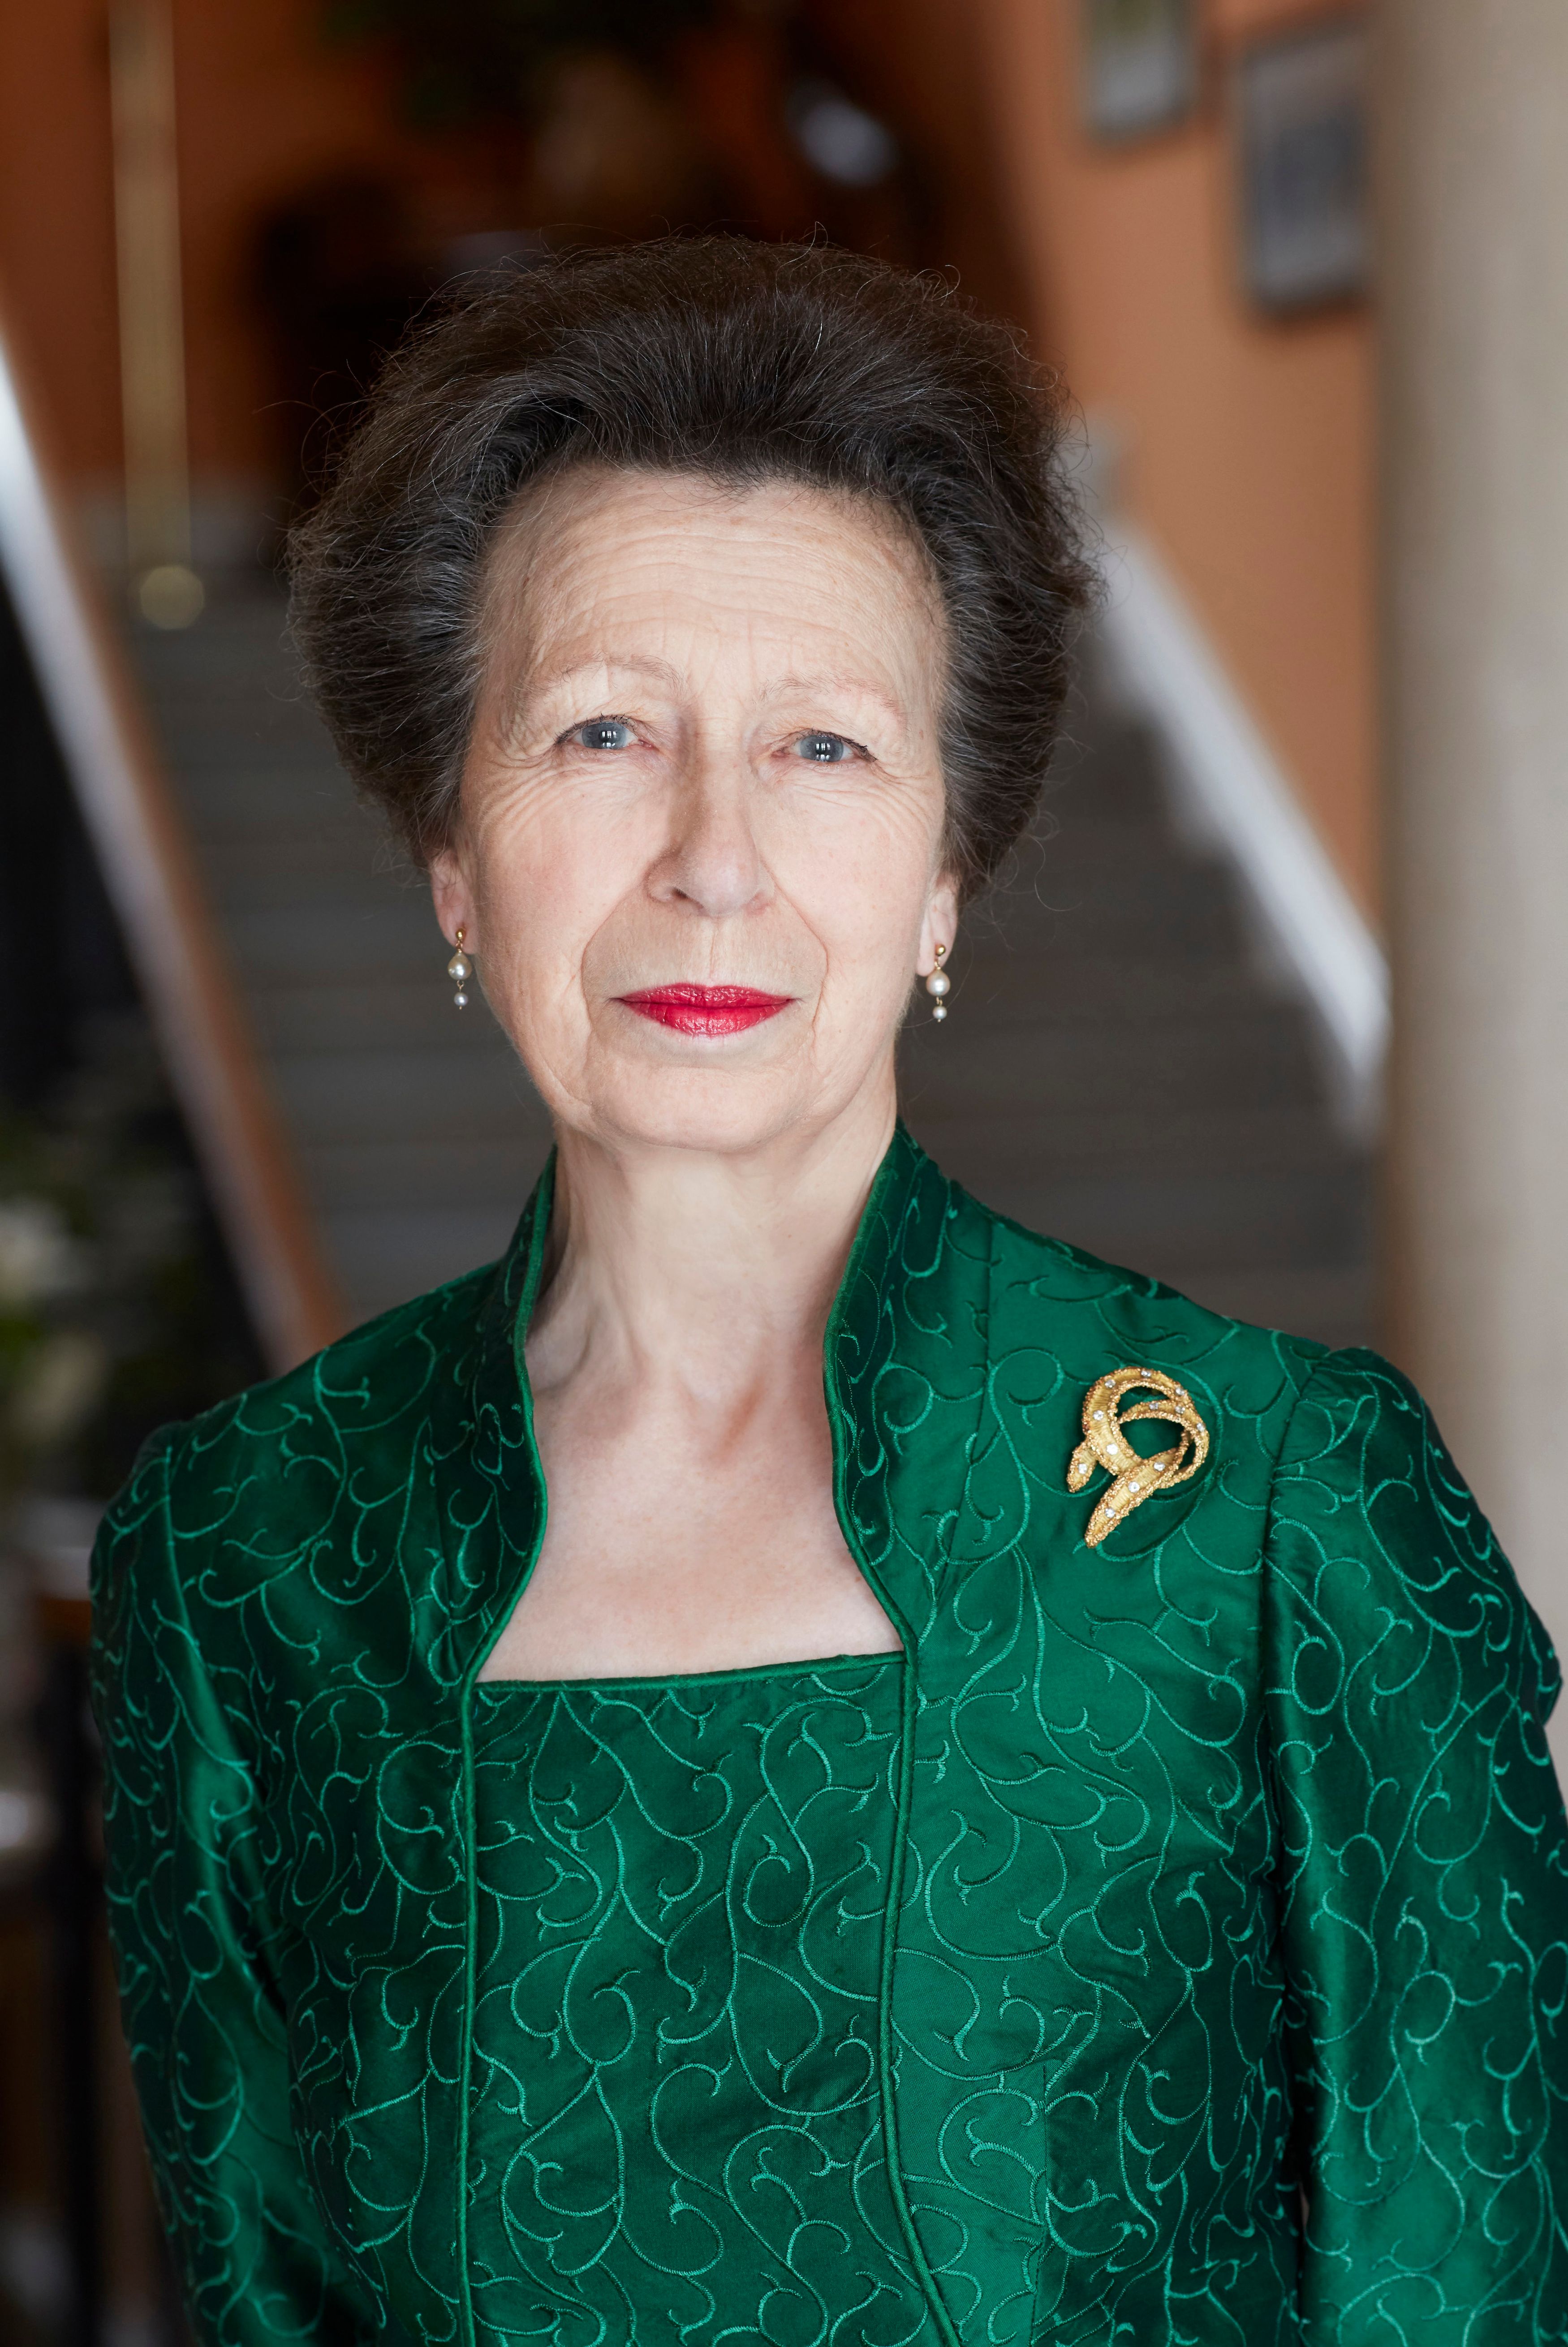 Princess Anne posing for a portrait at her home at Gatcombe Park in late February 2020. The photo was released to celebrate the Princess's 70th birthday | Photo: John Swannell / Camera Press via Getty Images